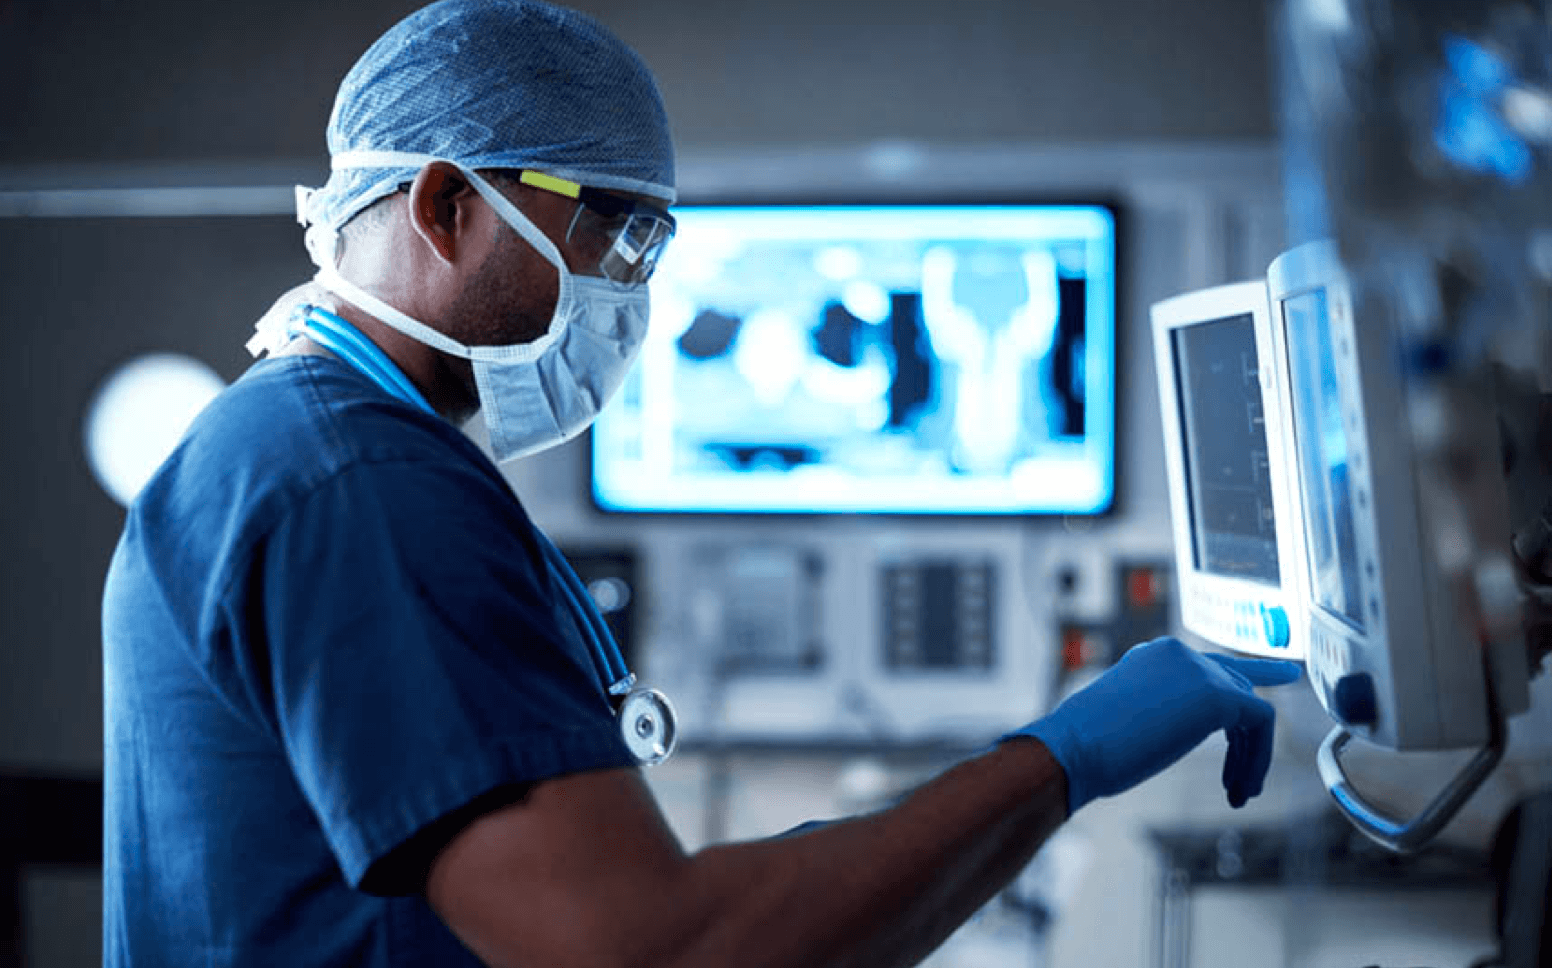 Remote Video Monitoring Surveillance Solutions for Hospitals